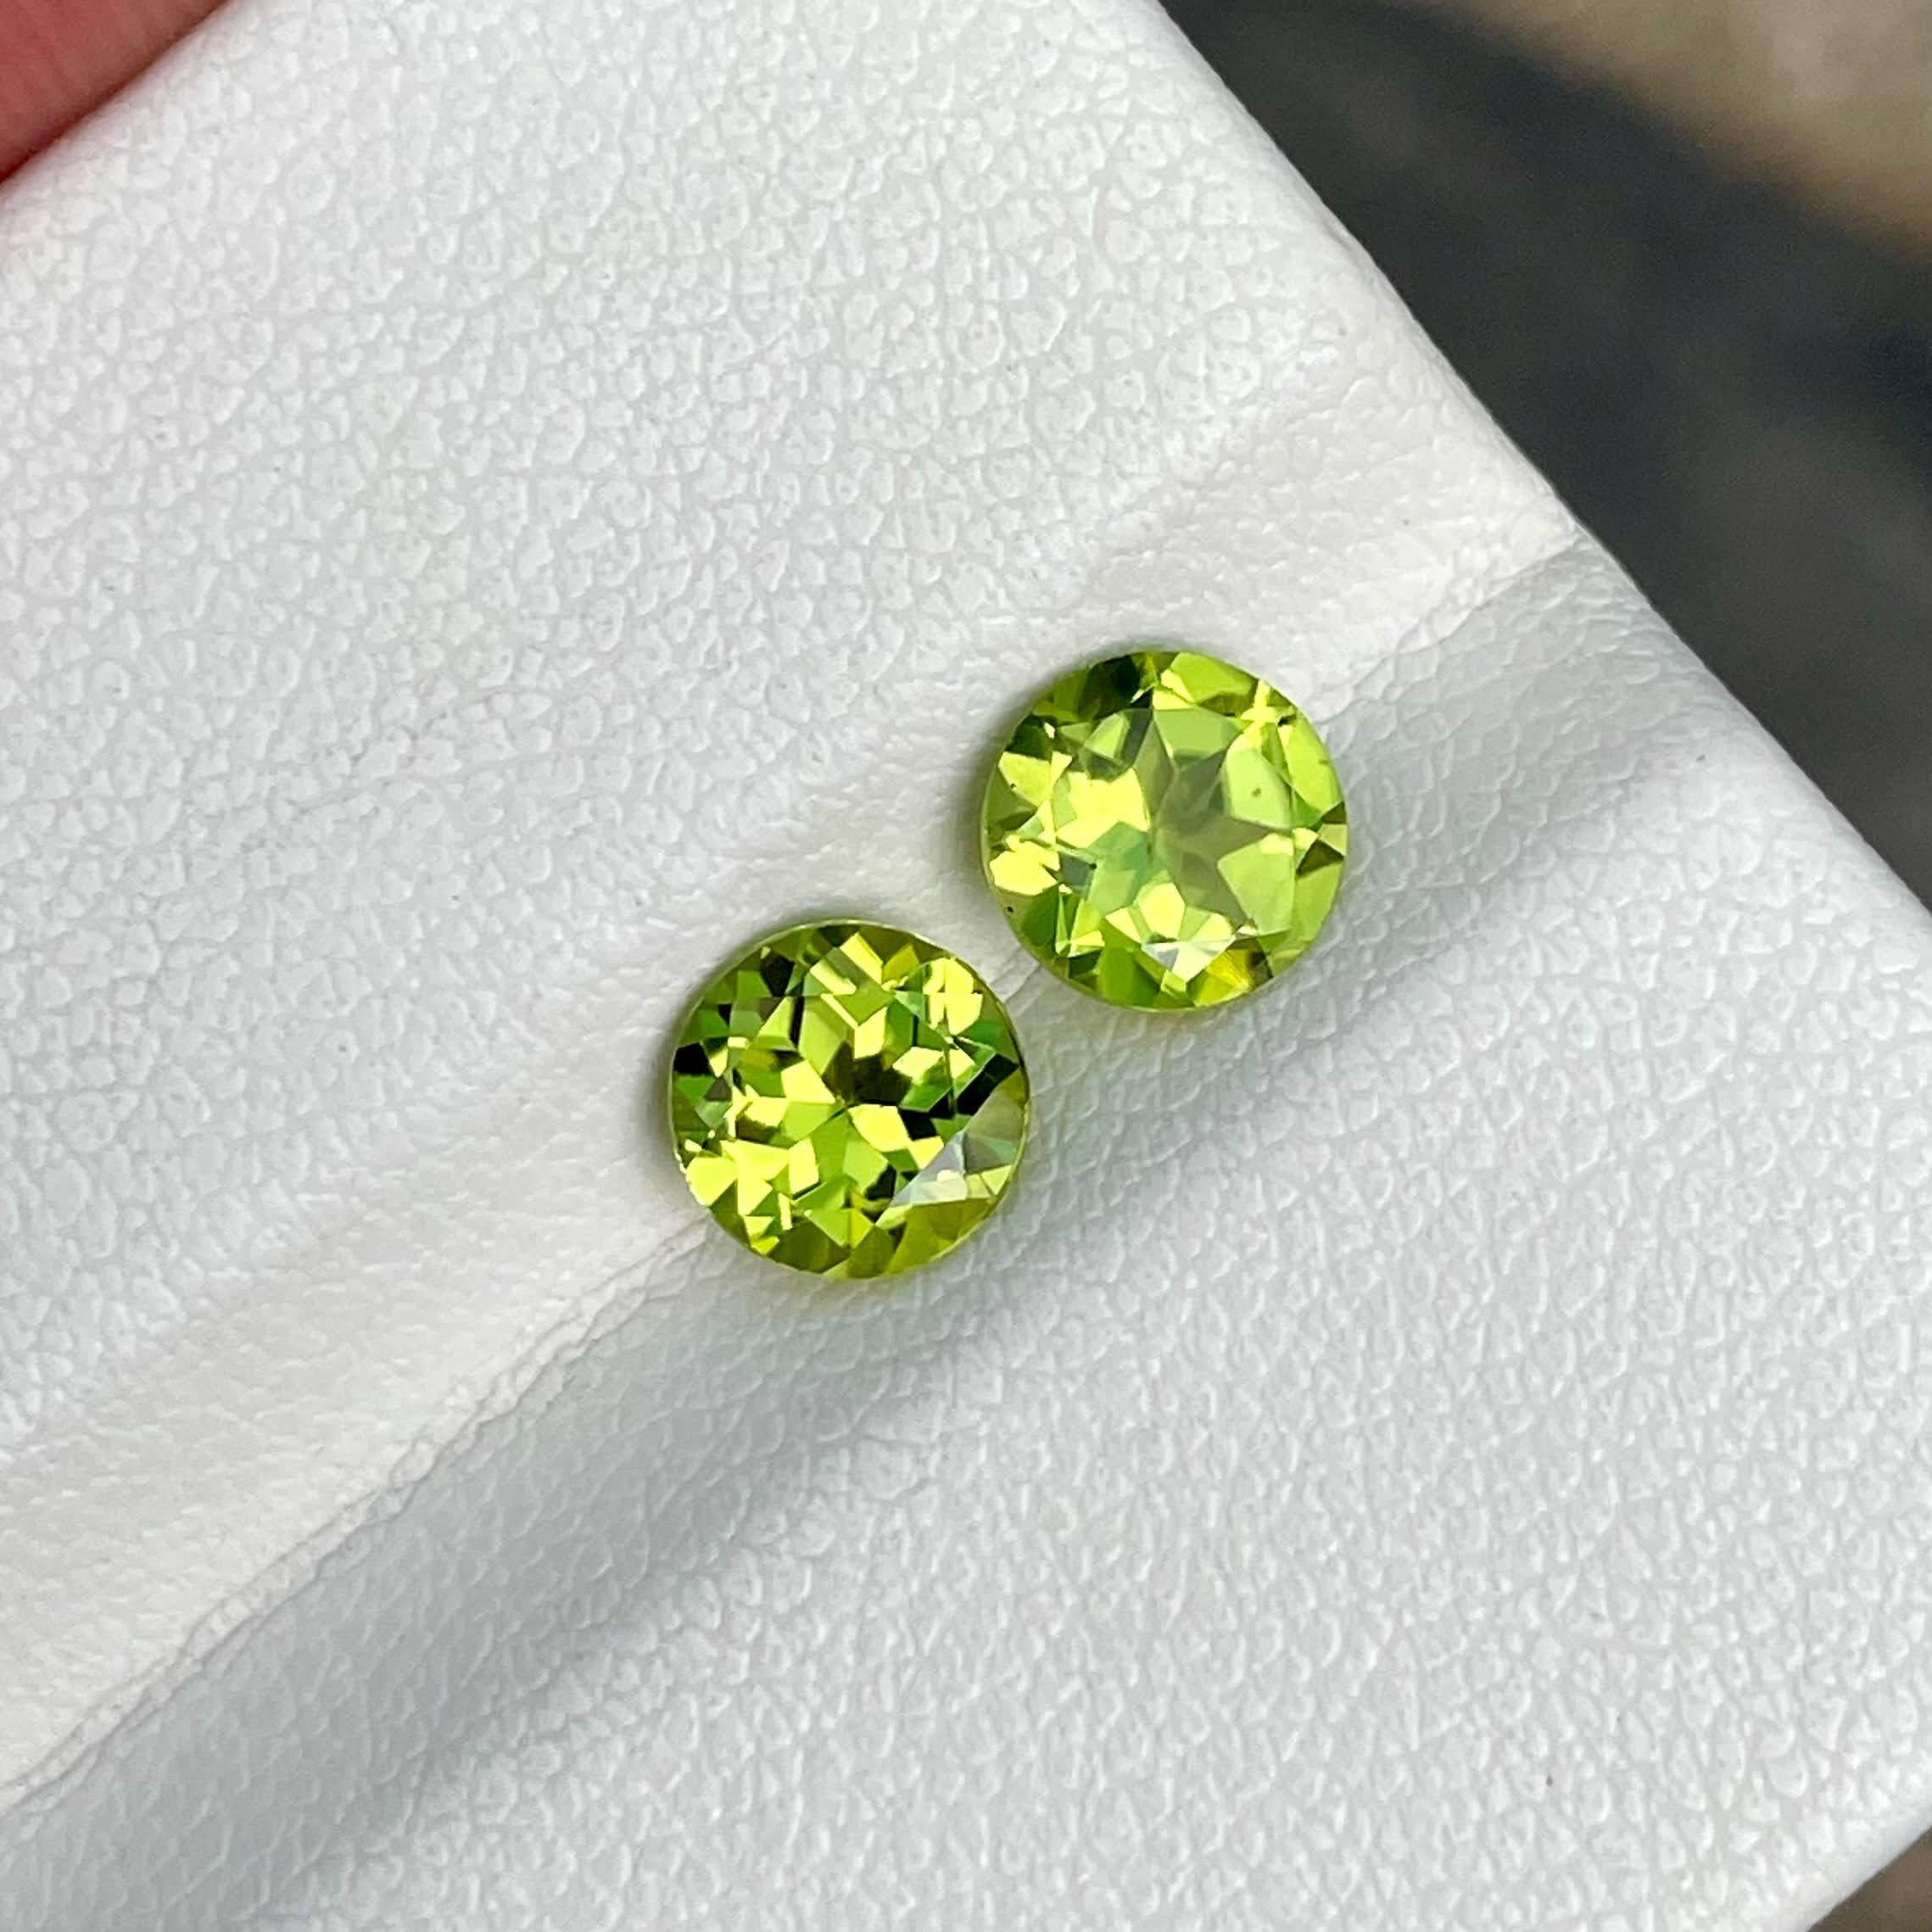 Taille ronde 1.90 Carats Green Peridot Pair Round Cut 3 Pieces Natural Pakistani Gemstone en vente